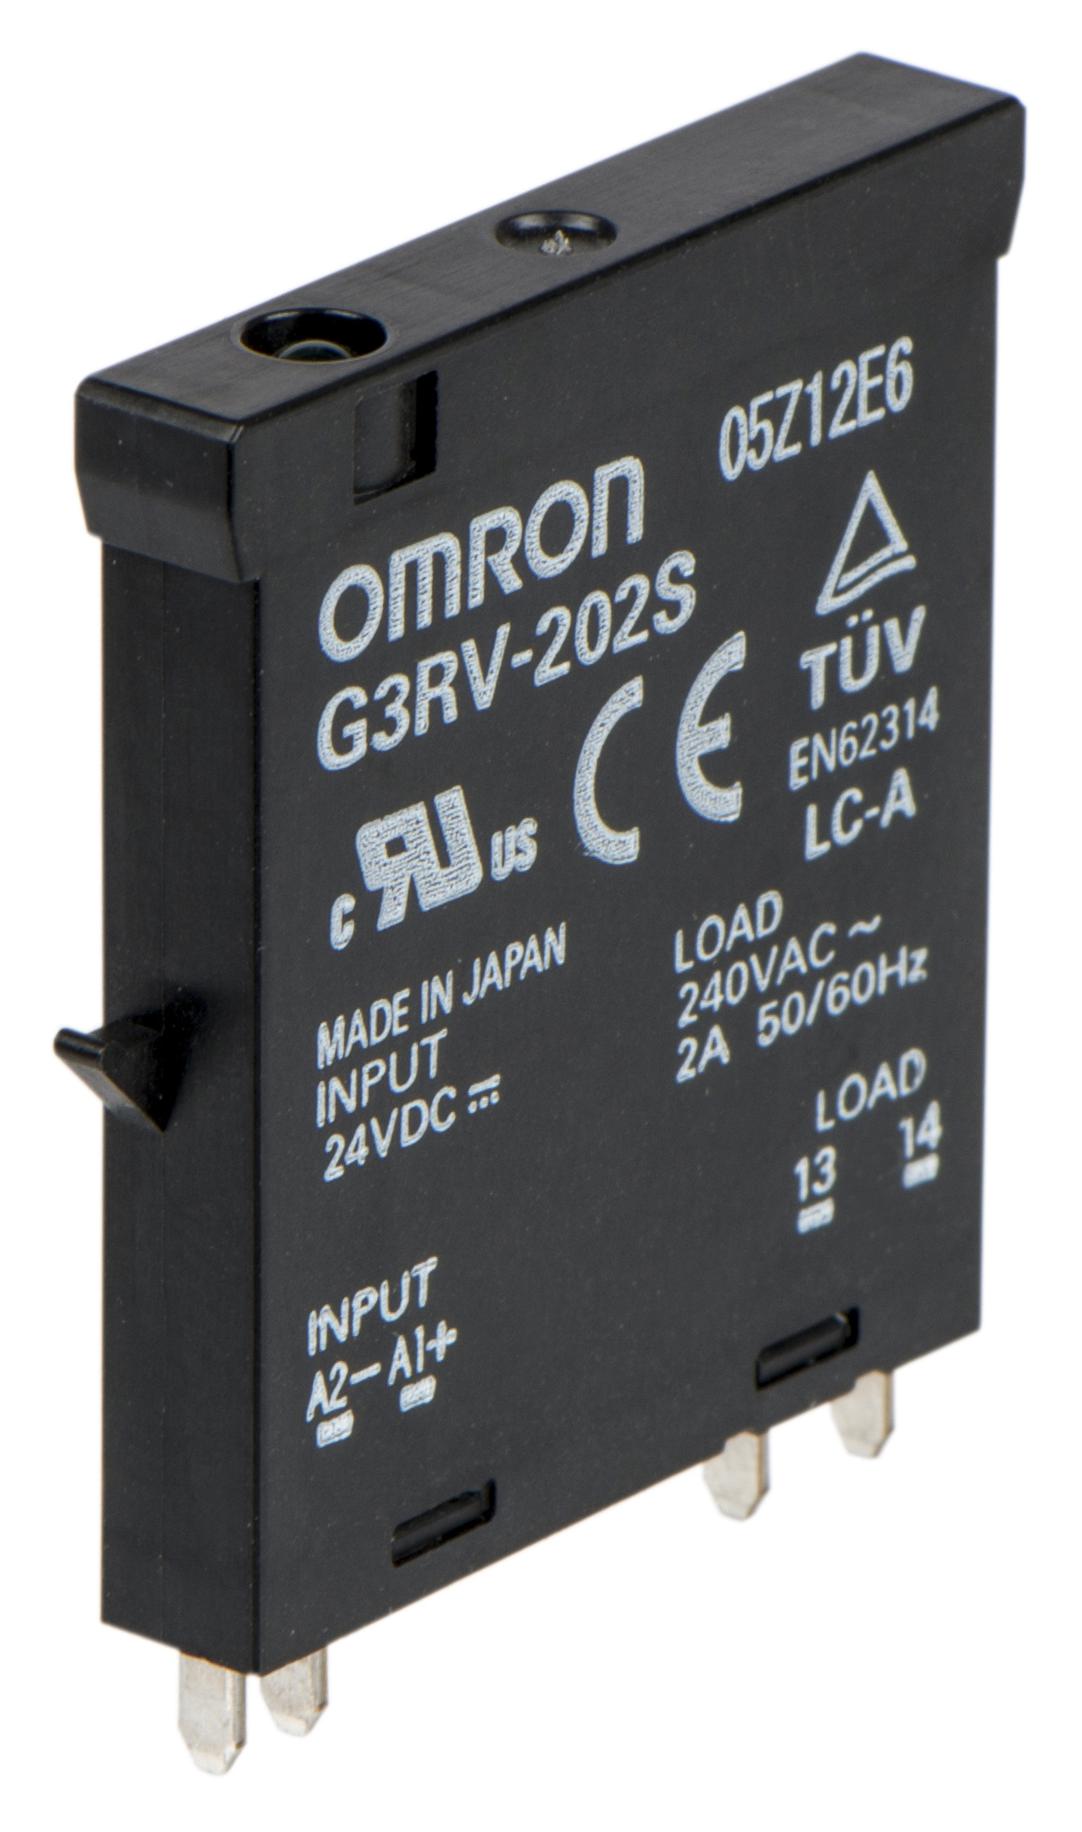 G3RV-202S  DC24 SOLID STATE RELAYS OMRON